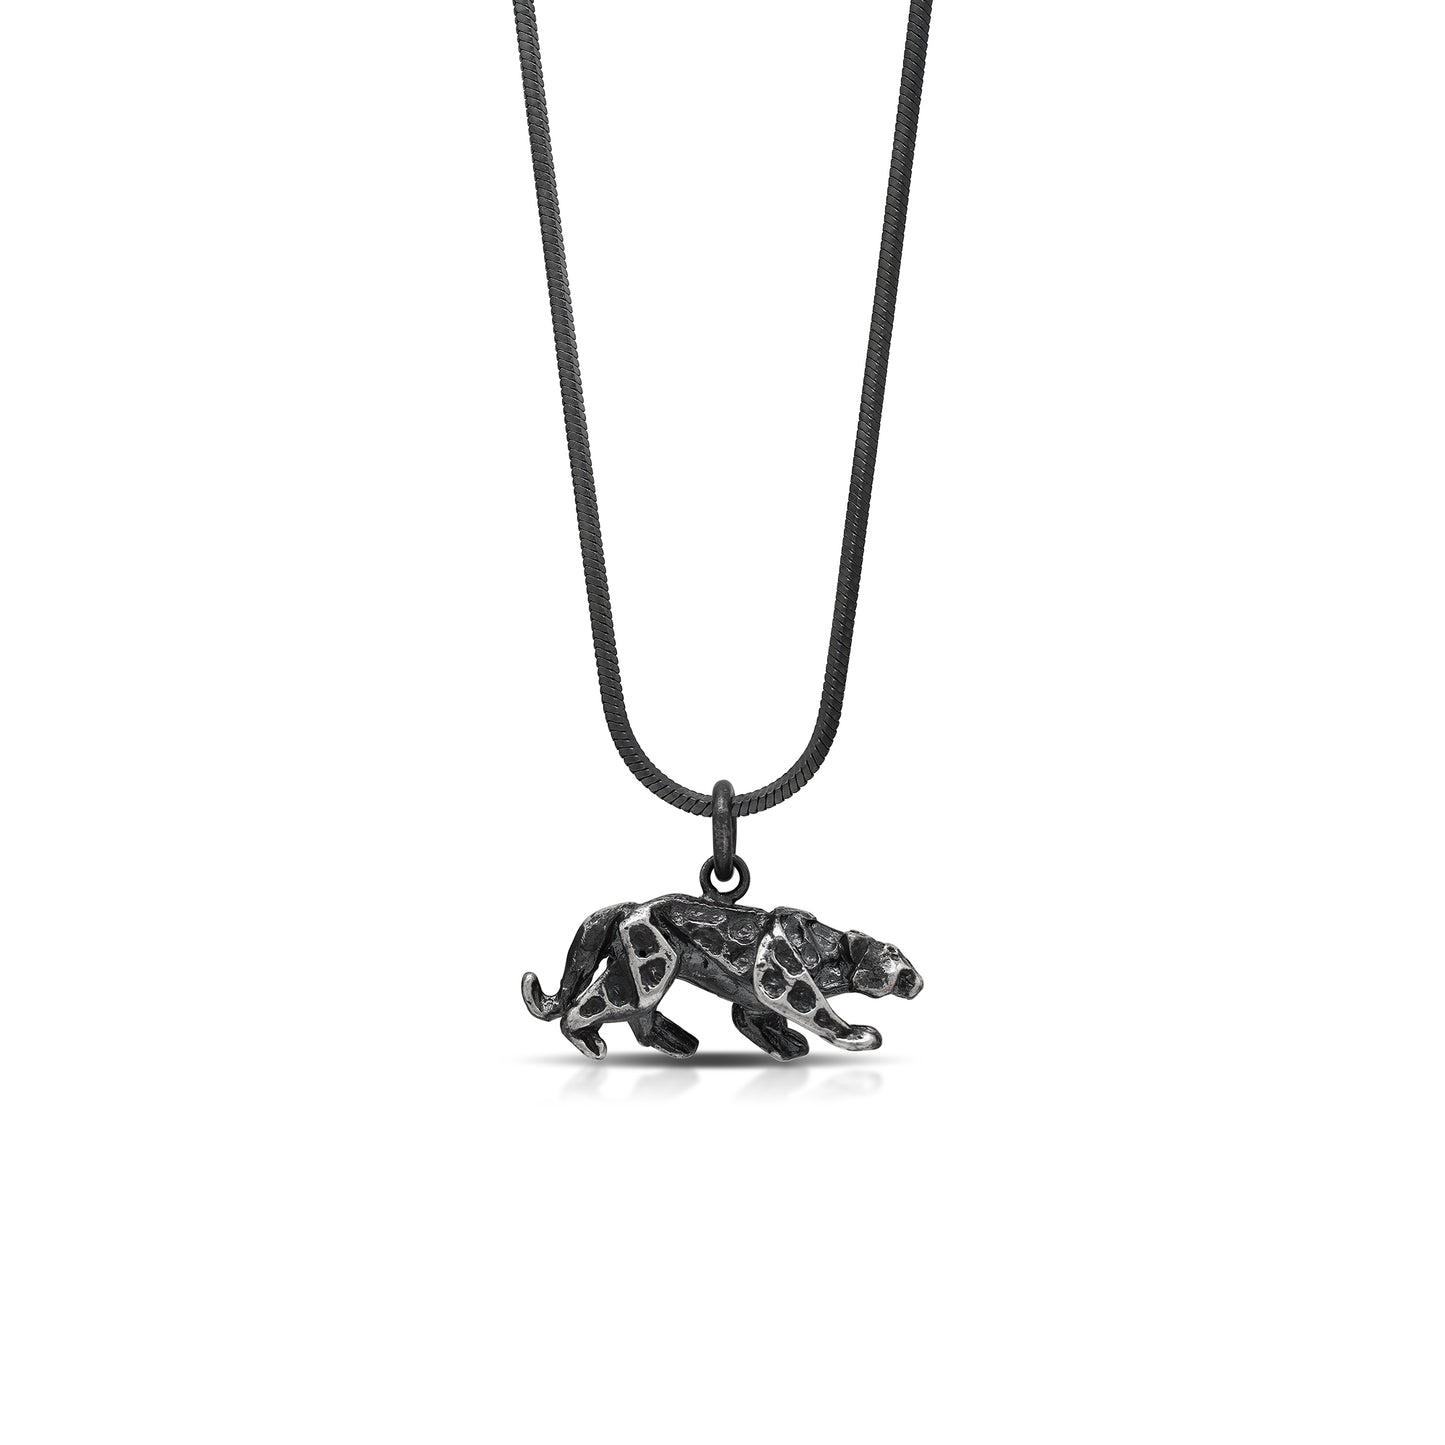 Leopard Origami with Snake Chain Necklace